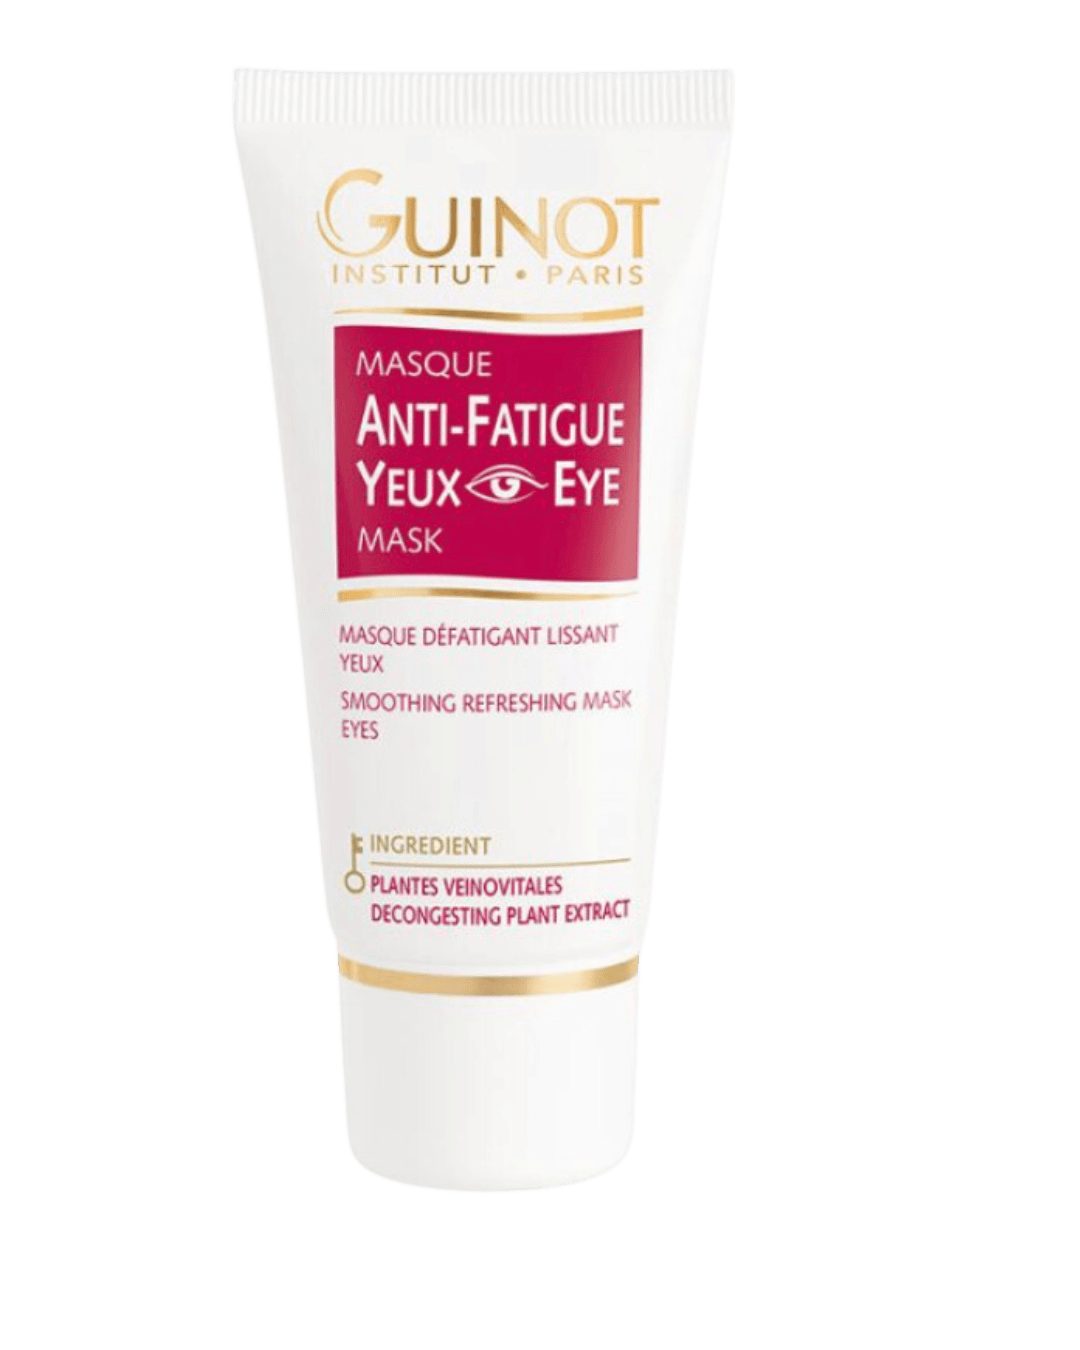 Daily Vanity Beauty Awards 2024 Best Skincare GUINOT Anti-Fatigue Eye Mask Voted By Beauty Experts